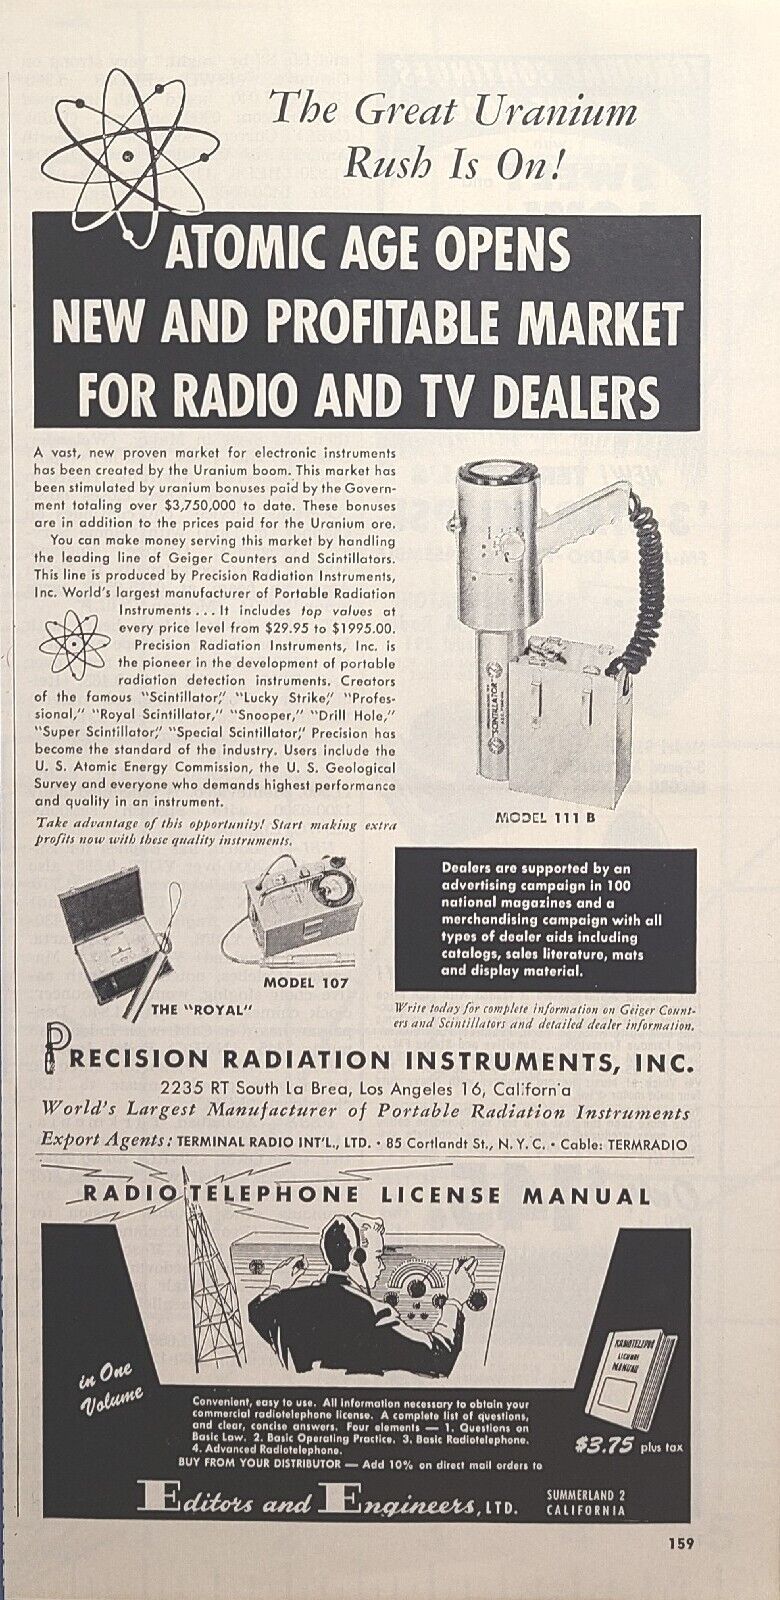 Precision Radiation Instruments Geiger Counters Atomic Age Vintage Print Ad 1955